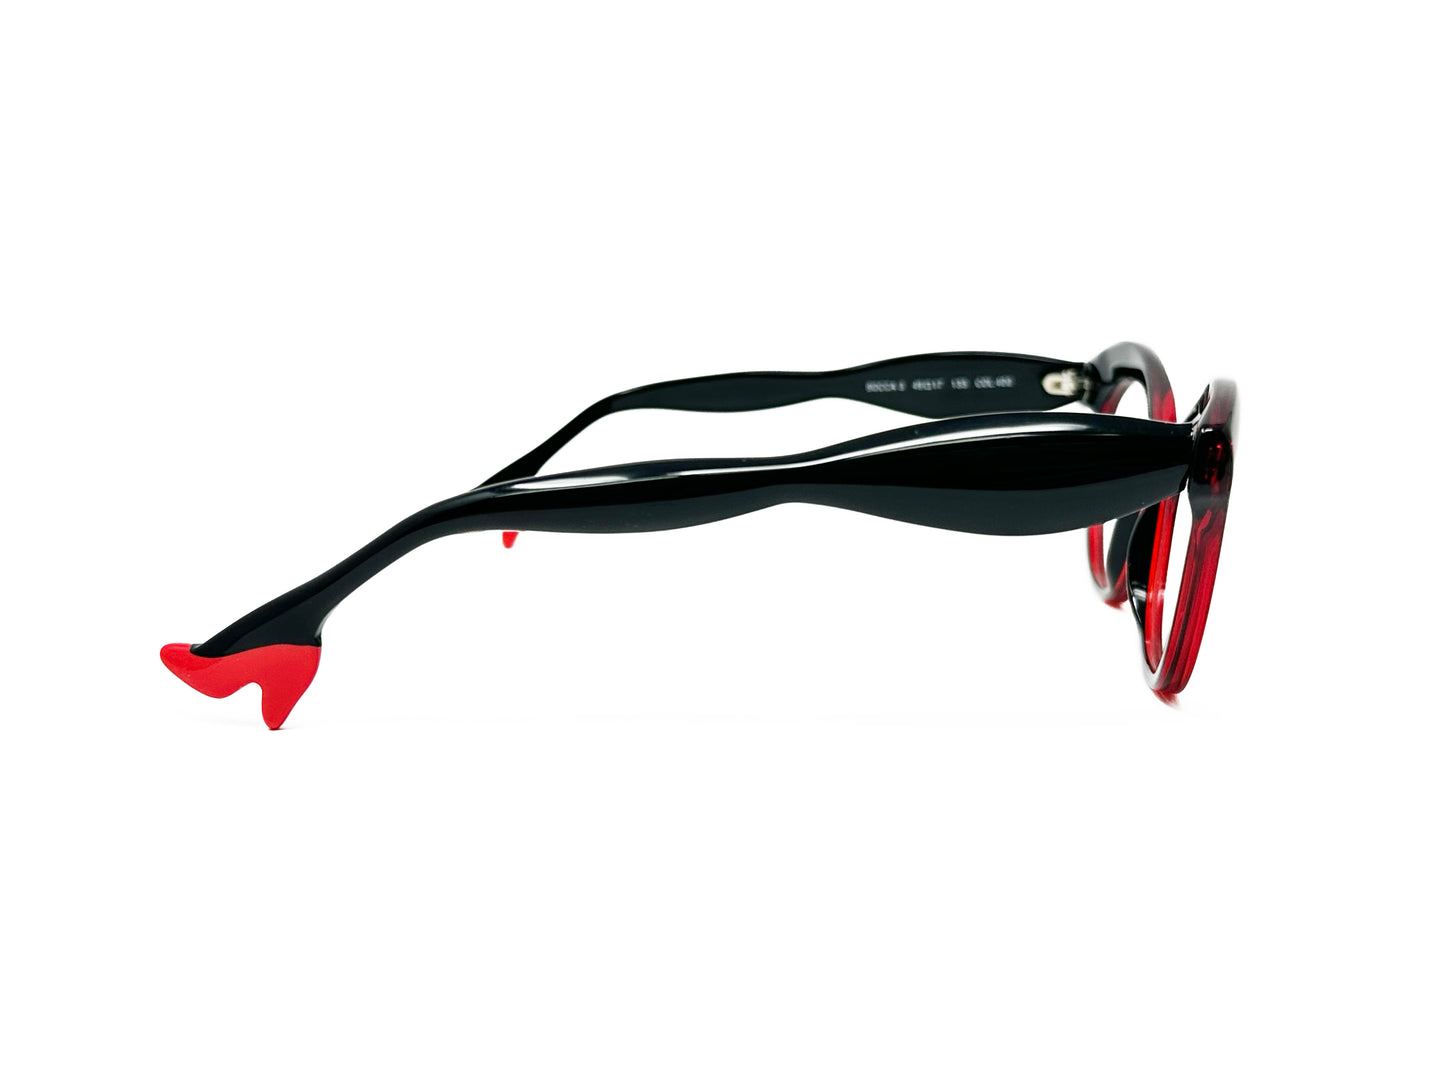 Face a Face acetate, cat-eye optical frame with curved top. Model: Bocca 3. Color: 400 -Black with red temples. End of temple is designed to look like a heel. Side view.